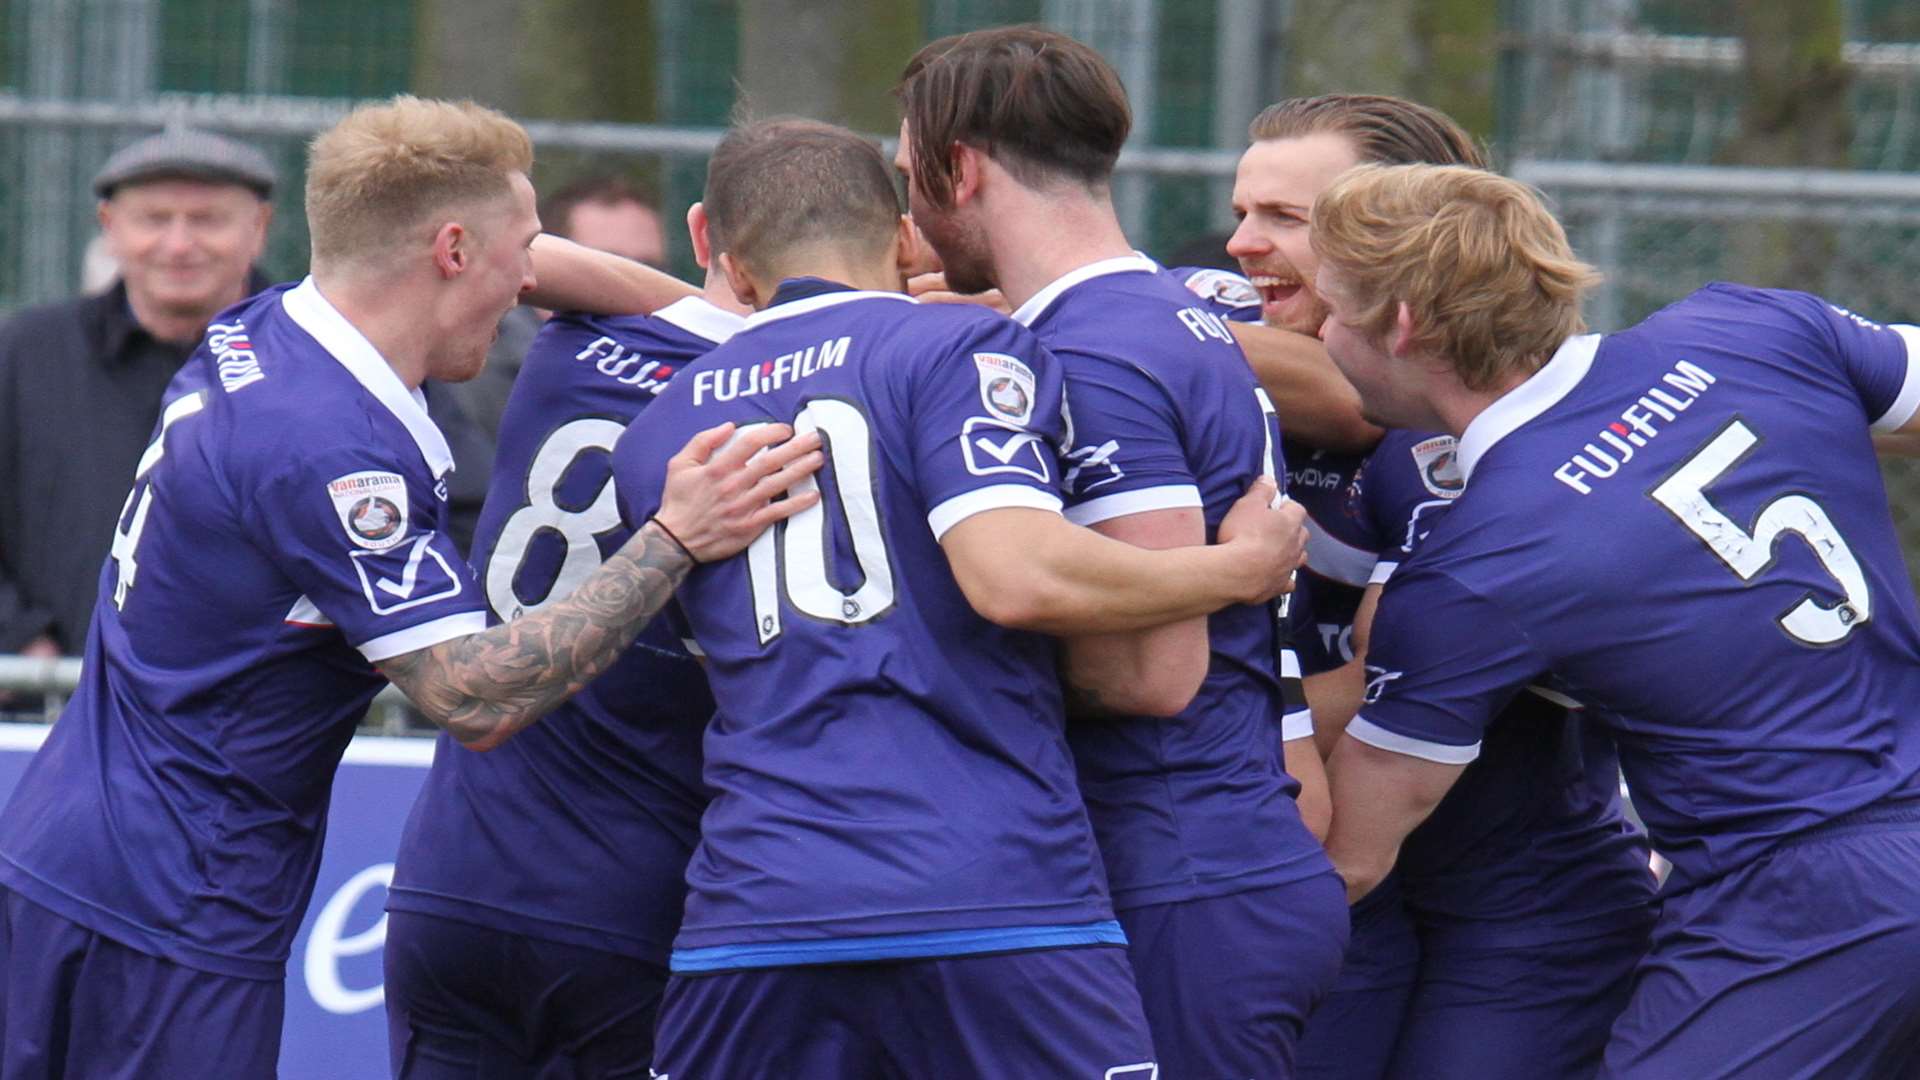 Margate celebrate David Hunt's opening goal in the 4-3 victory over Hemel Hempstead on Saturday. Picture: Don Walker